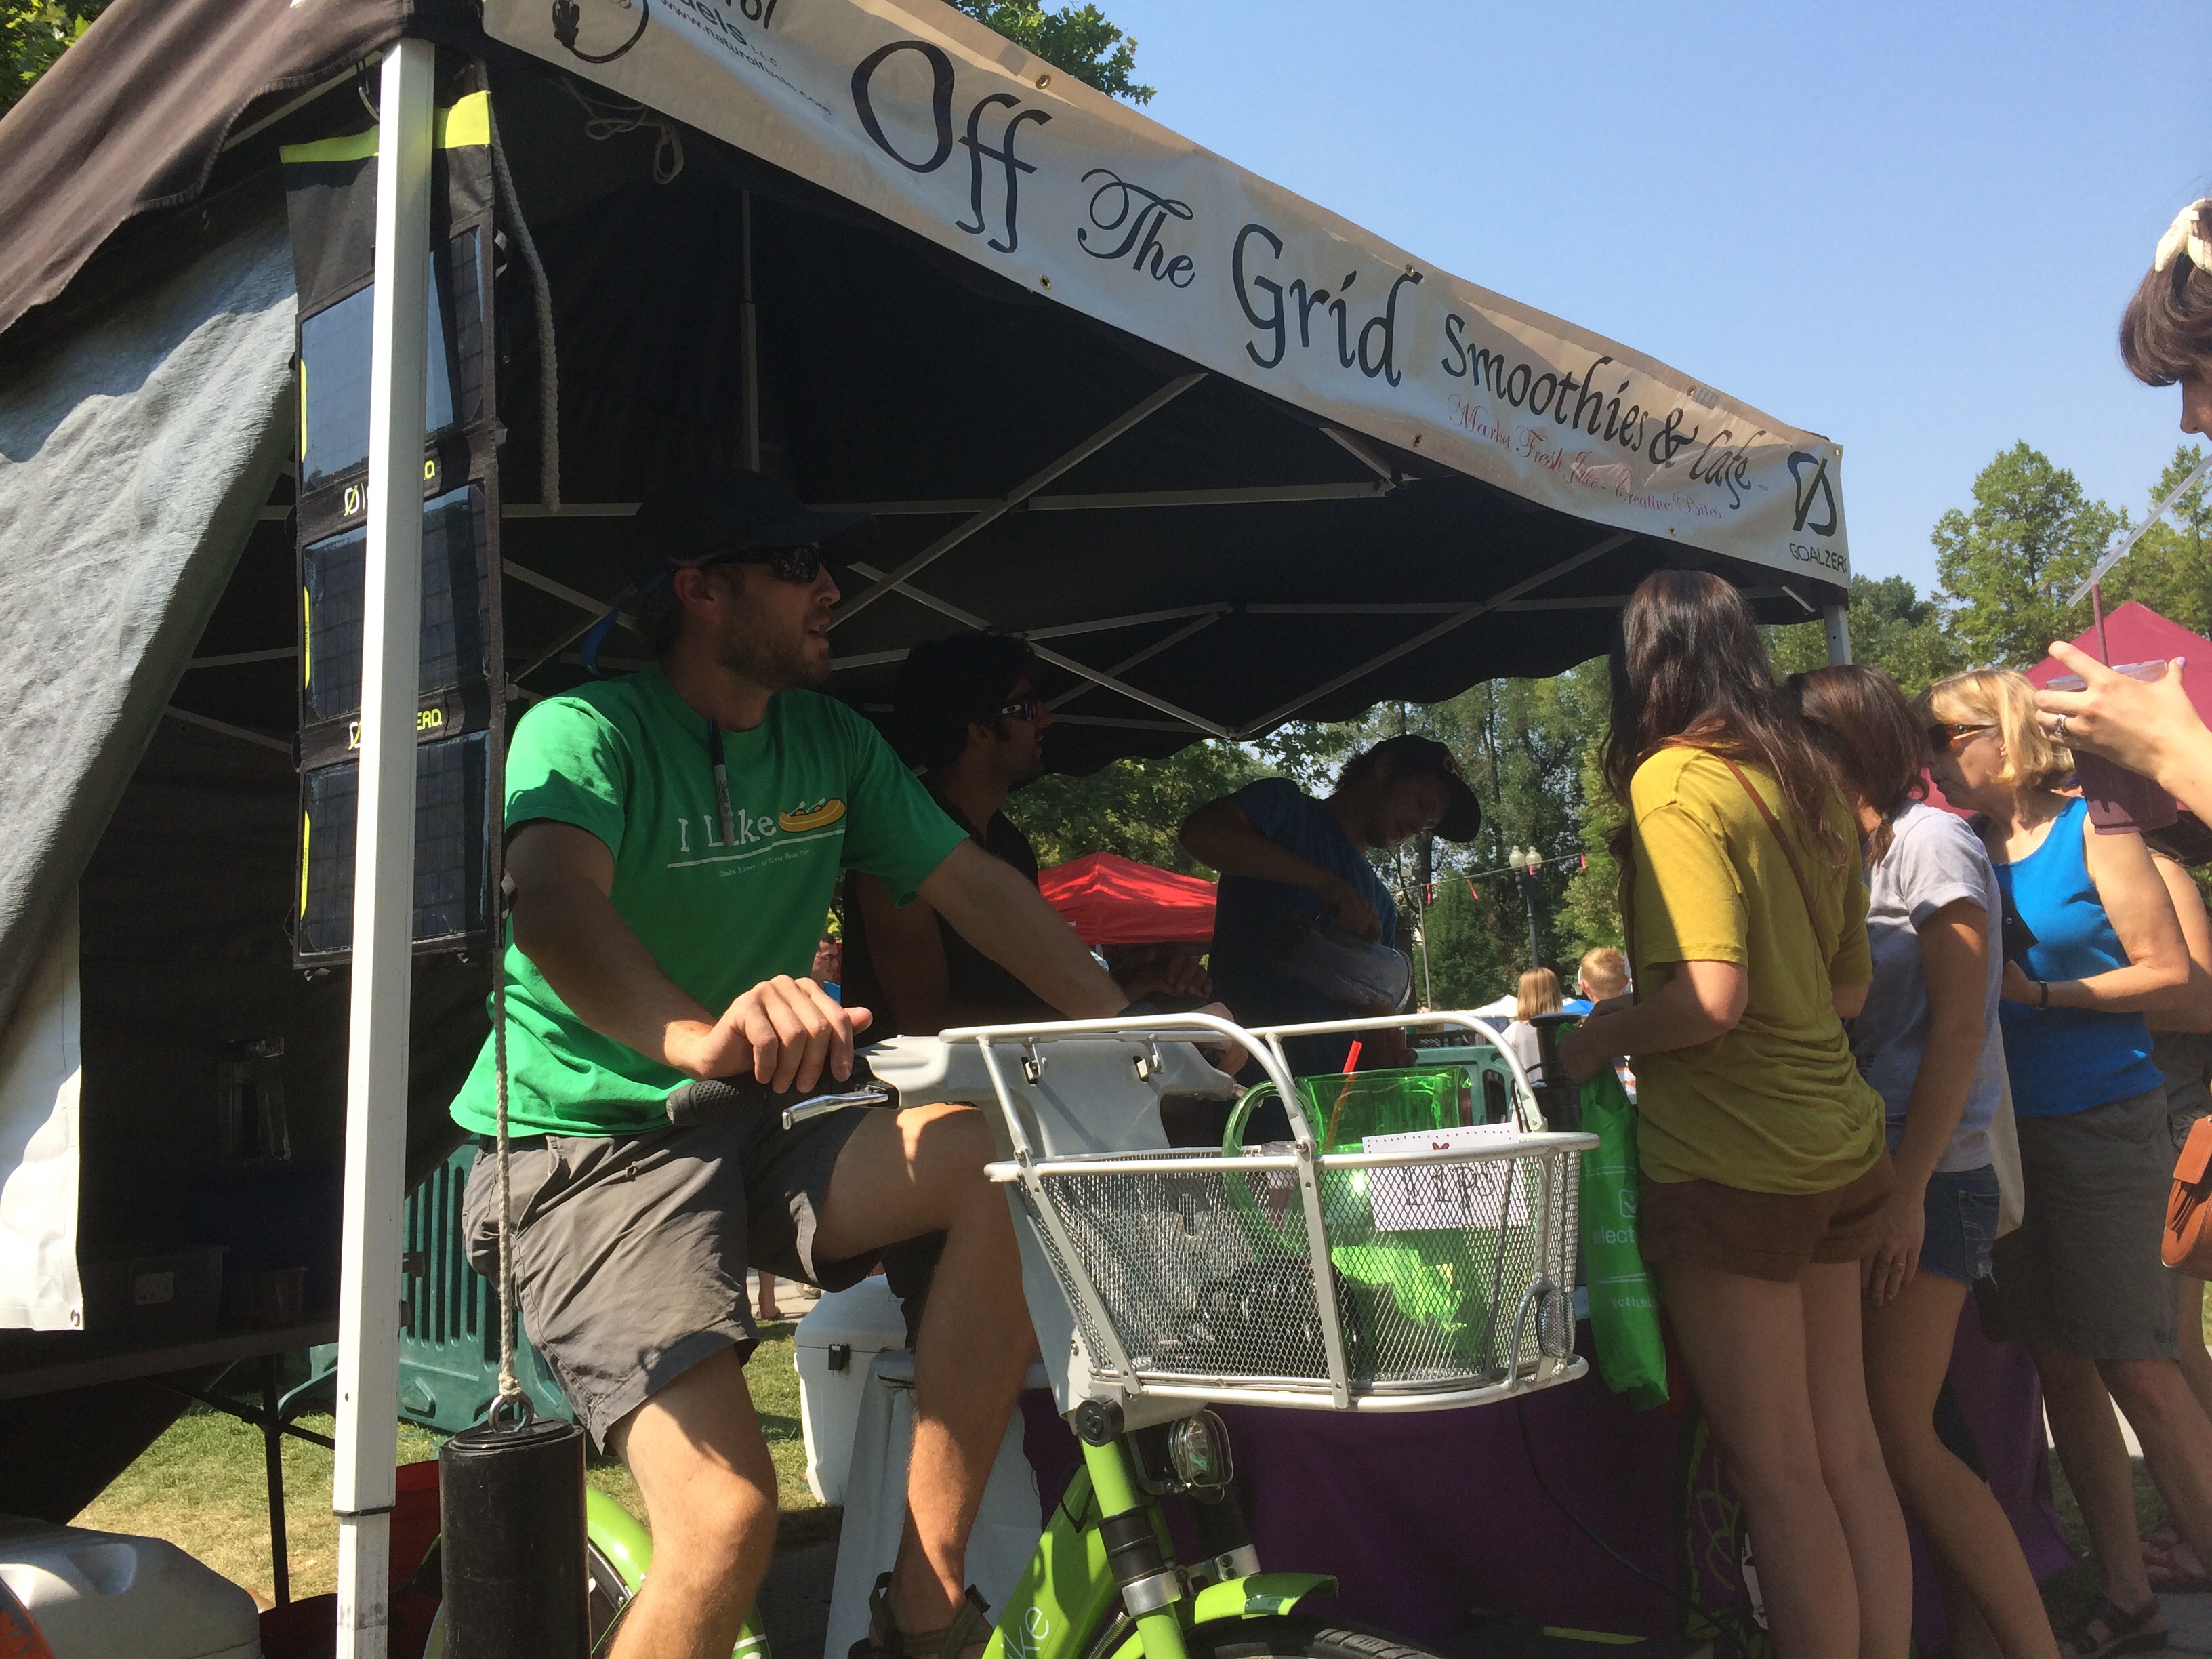 Off the Grid uses a Greenbike to power a blender at the Salt Lake City Farmer's Market on July 19, 2014. They make healthy, high quality smoothies. Photo by Dave Iltis